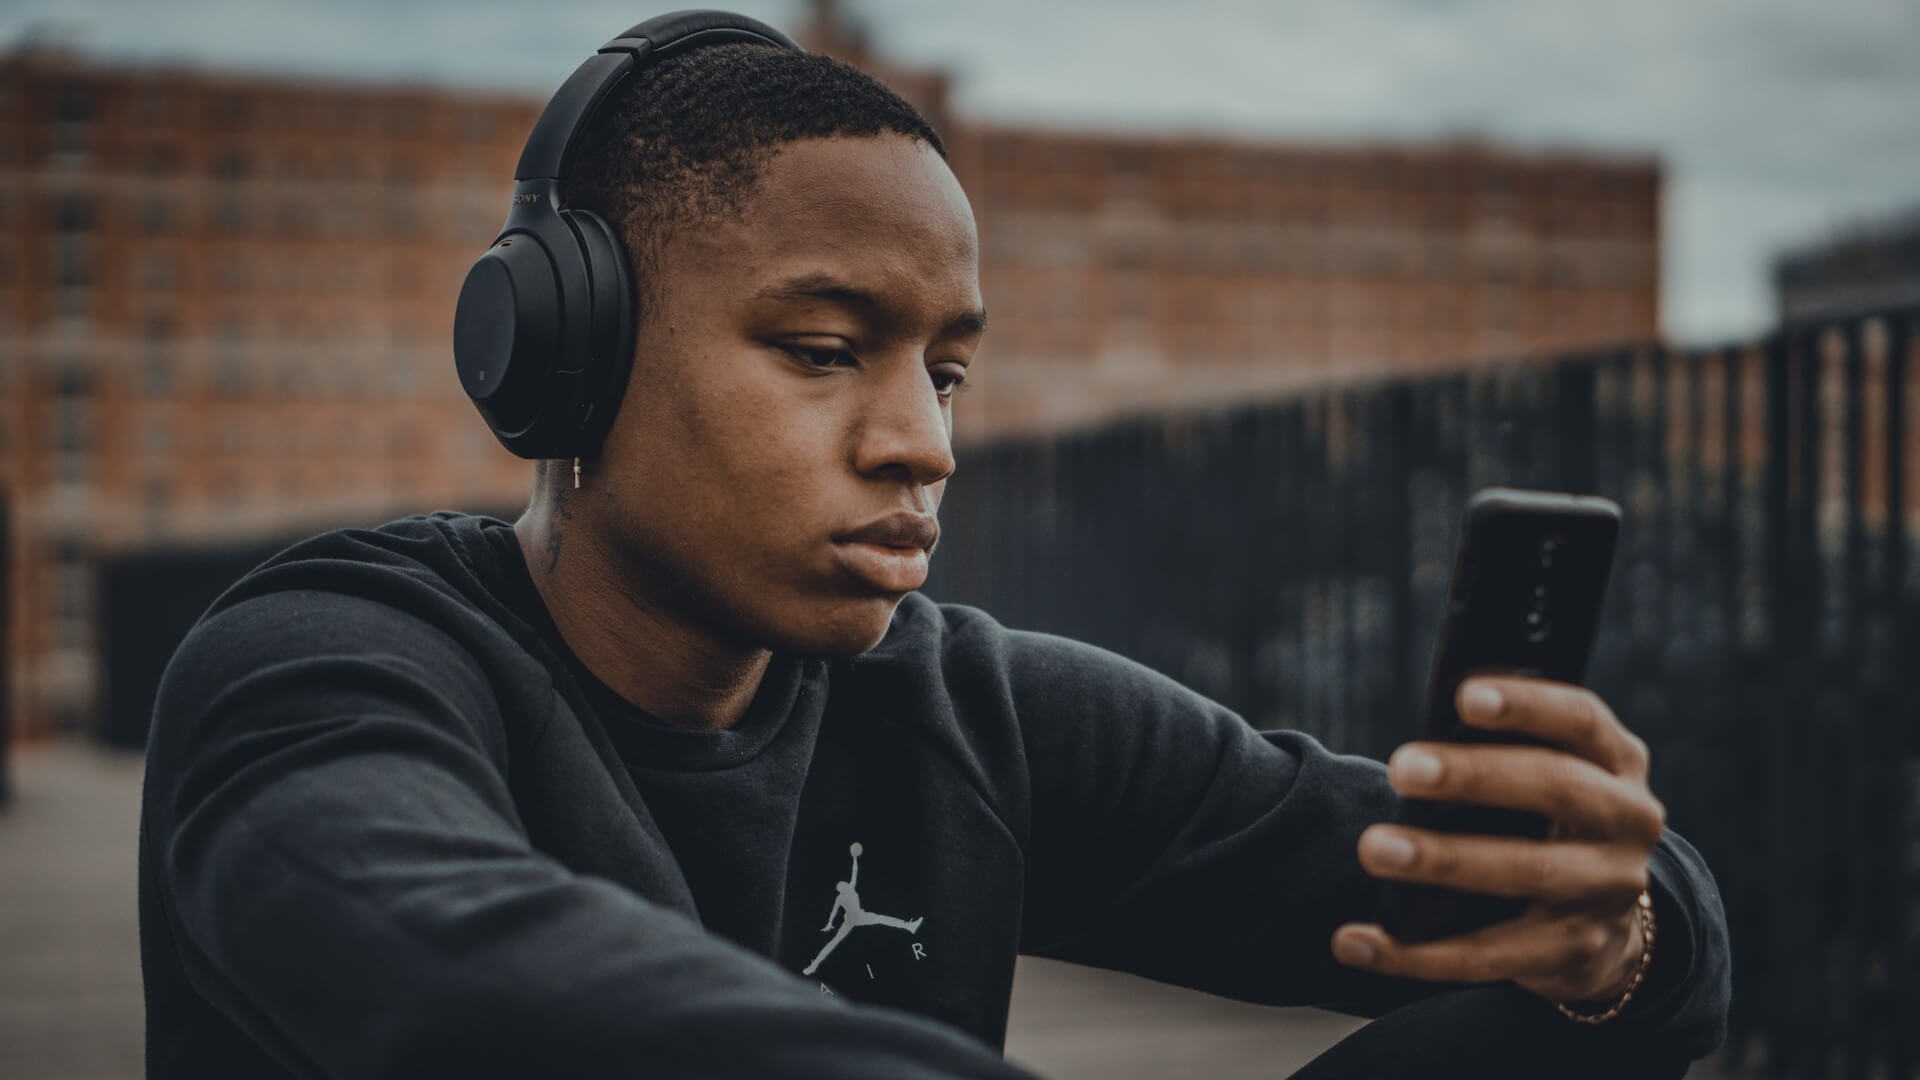 A guy listening to music while looking at his phone